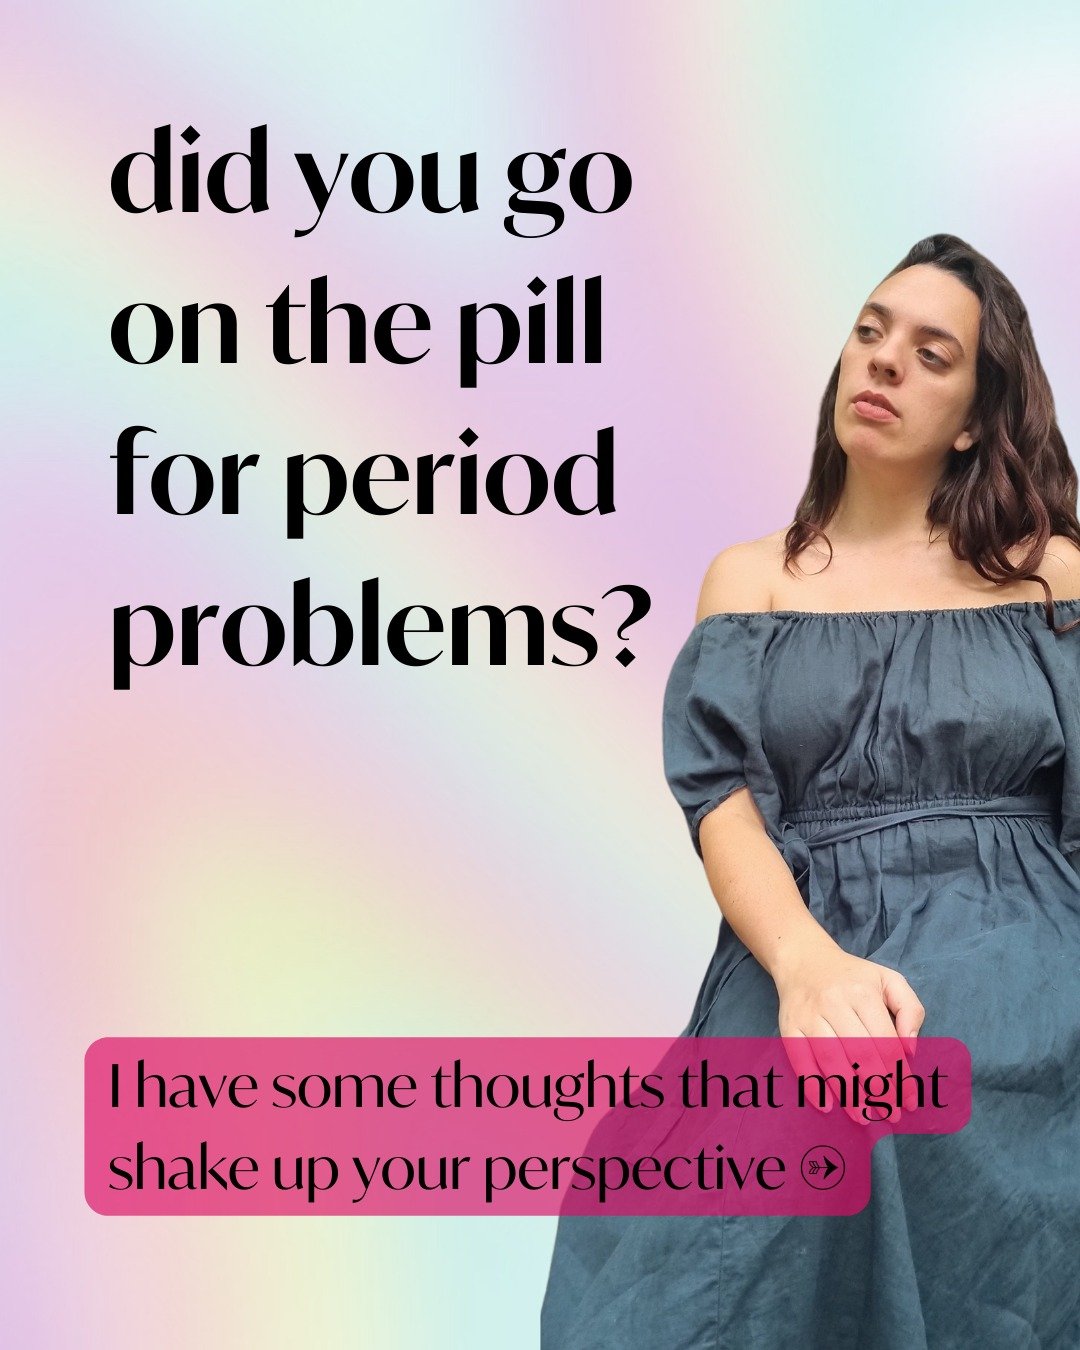 Your OG period problems weren't caused by not being on the pill...
So what WAS going on?

And has this root cause been addressed since you've come off the pill?

If not, it's possible that those original hormonal symptoms or period problems can come 